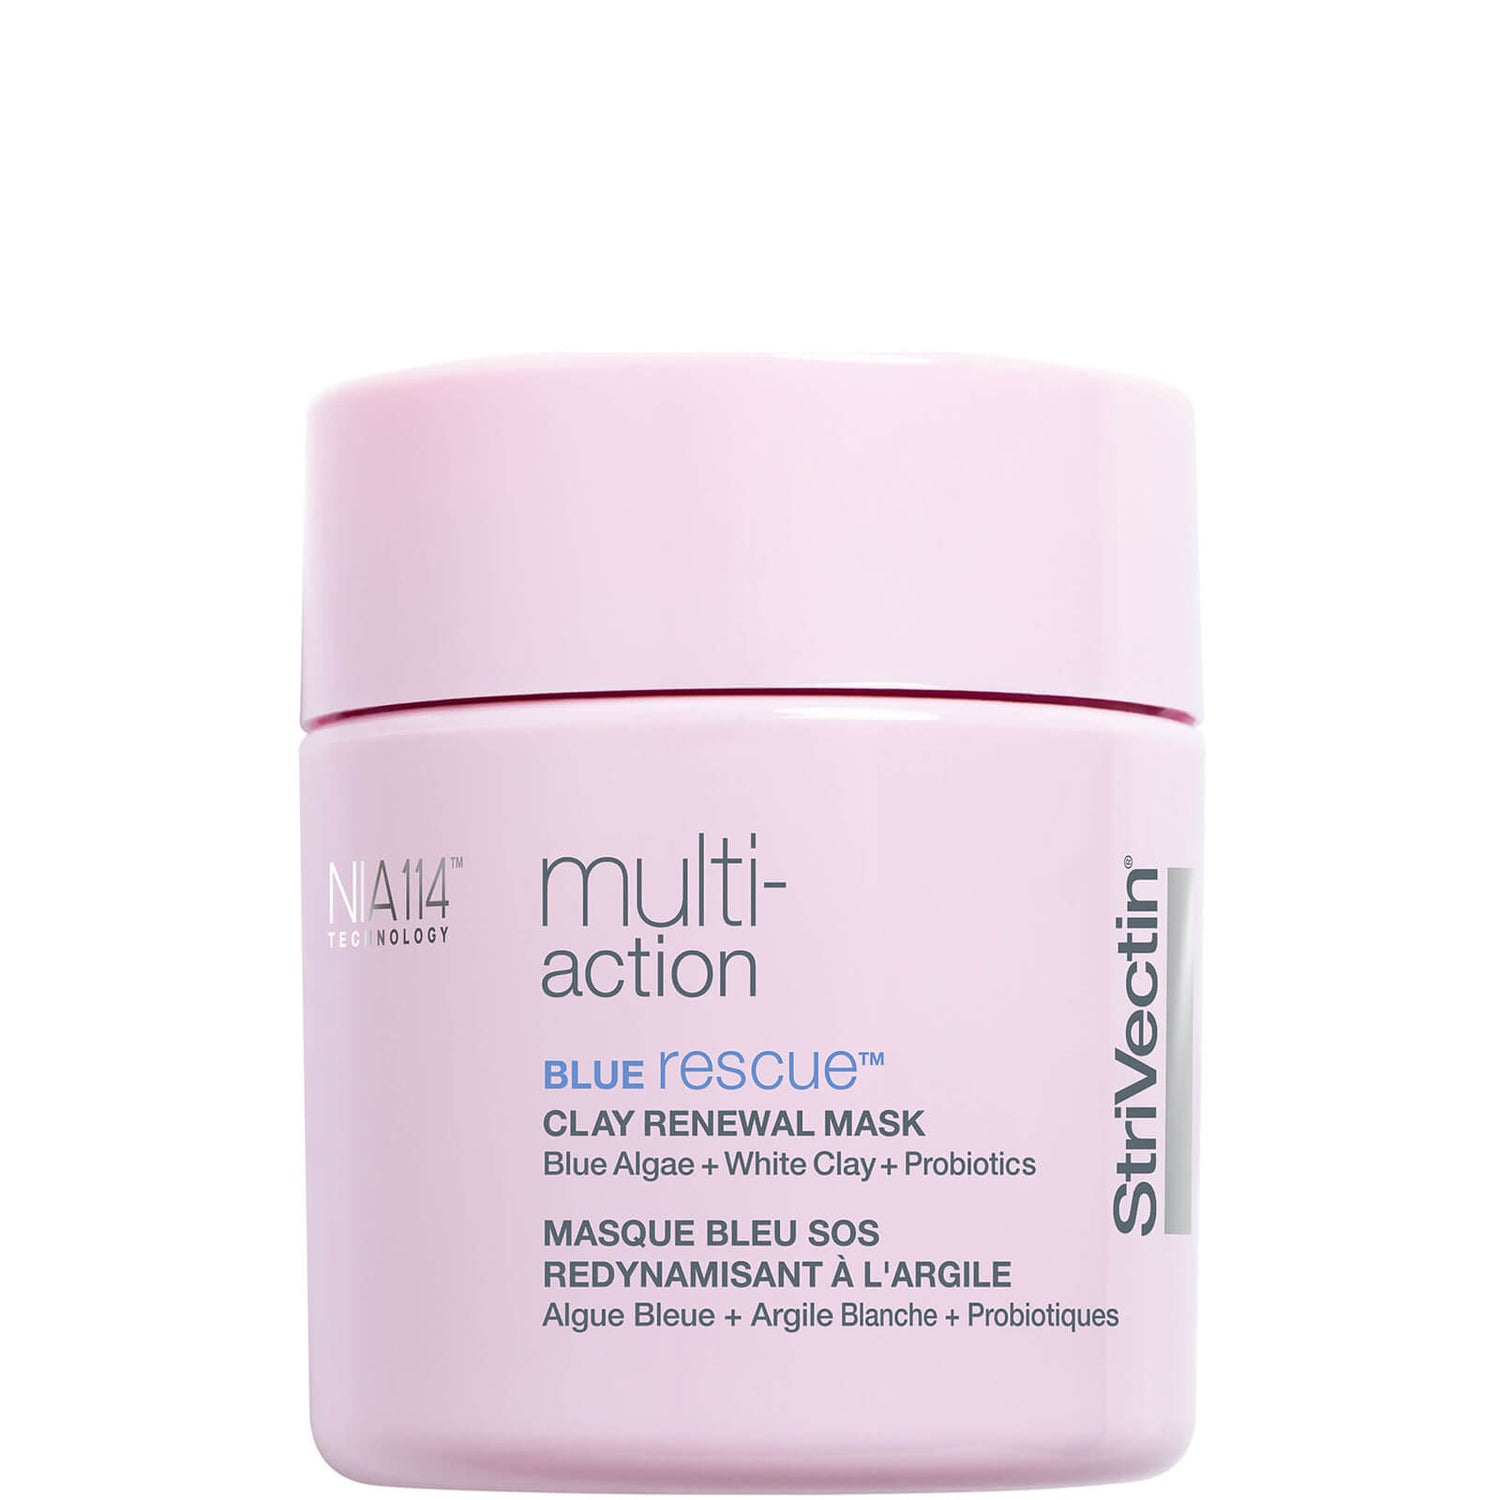 StriVectin Multi-Action Blue Rescue Clay Renewal Mask 3.2 oz